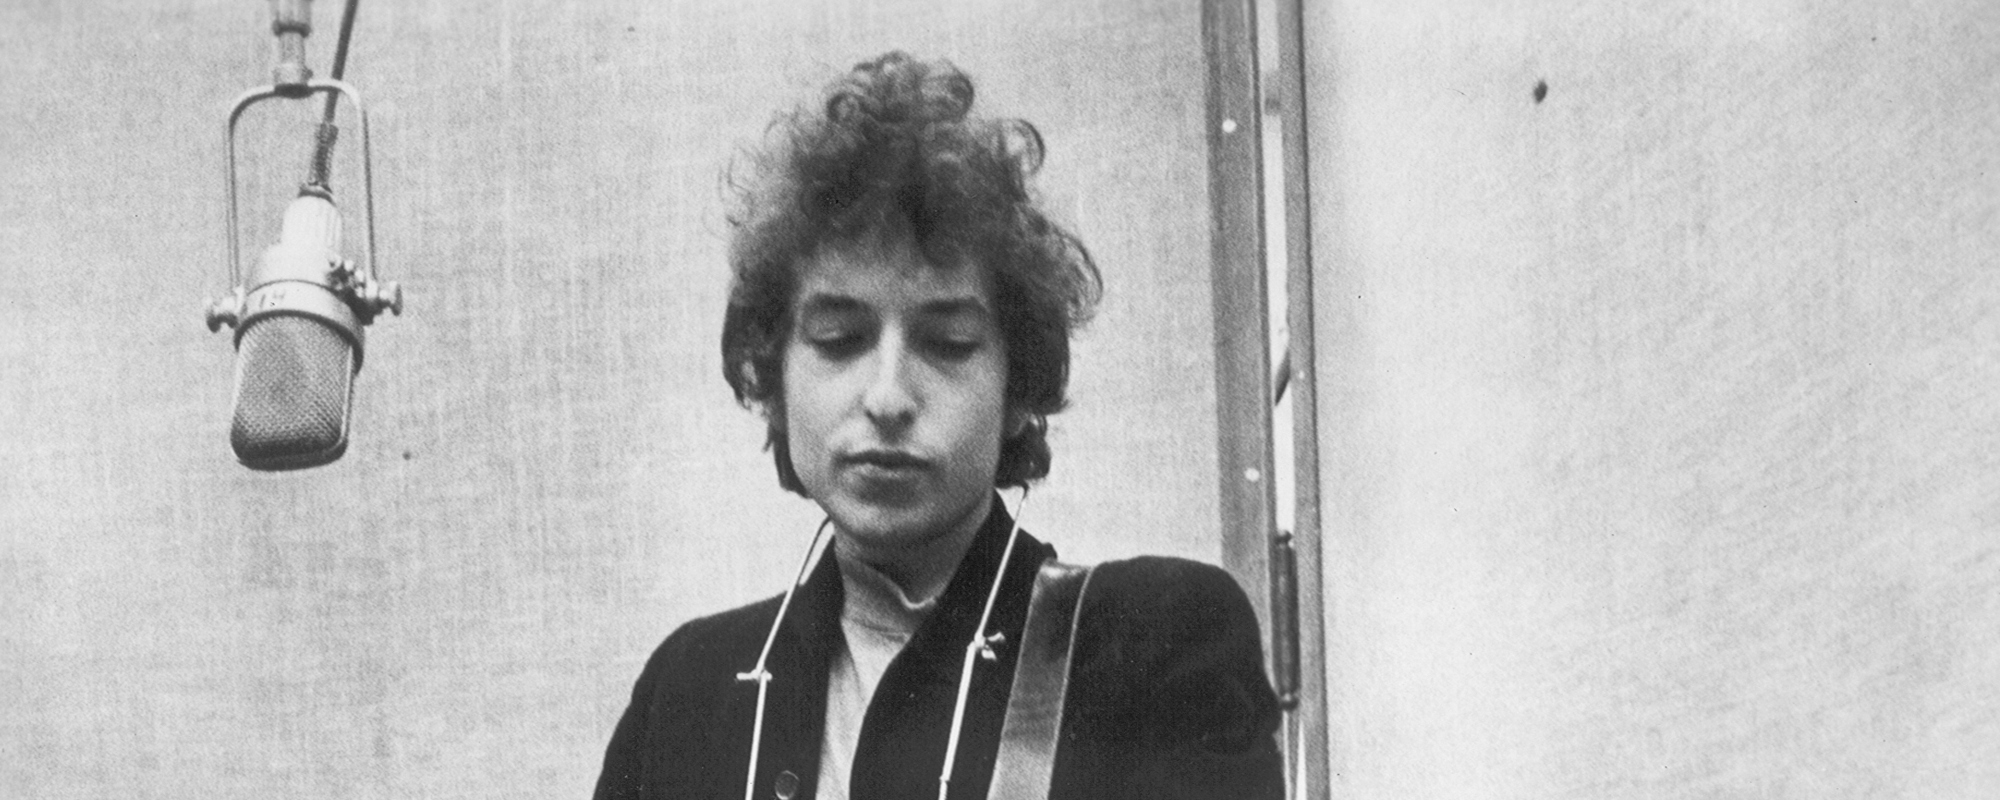 Behind the Album: The Landmark ‘Another Side of Bob Dylan’ by Bob Dylan